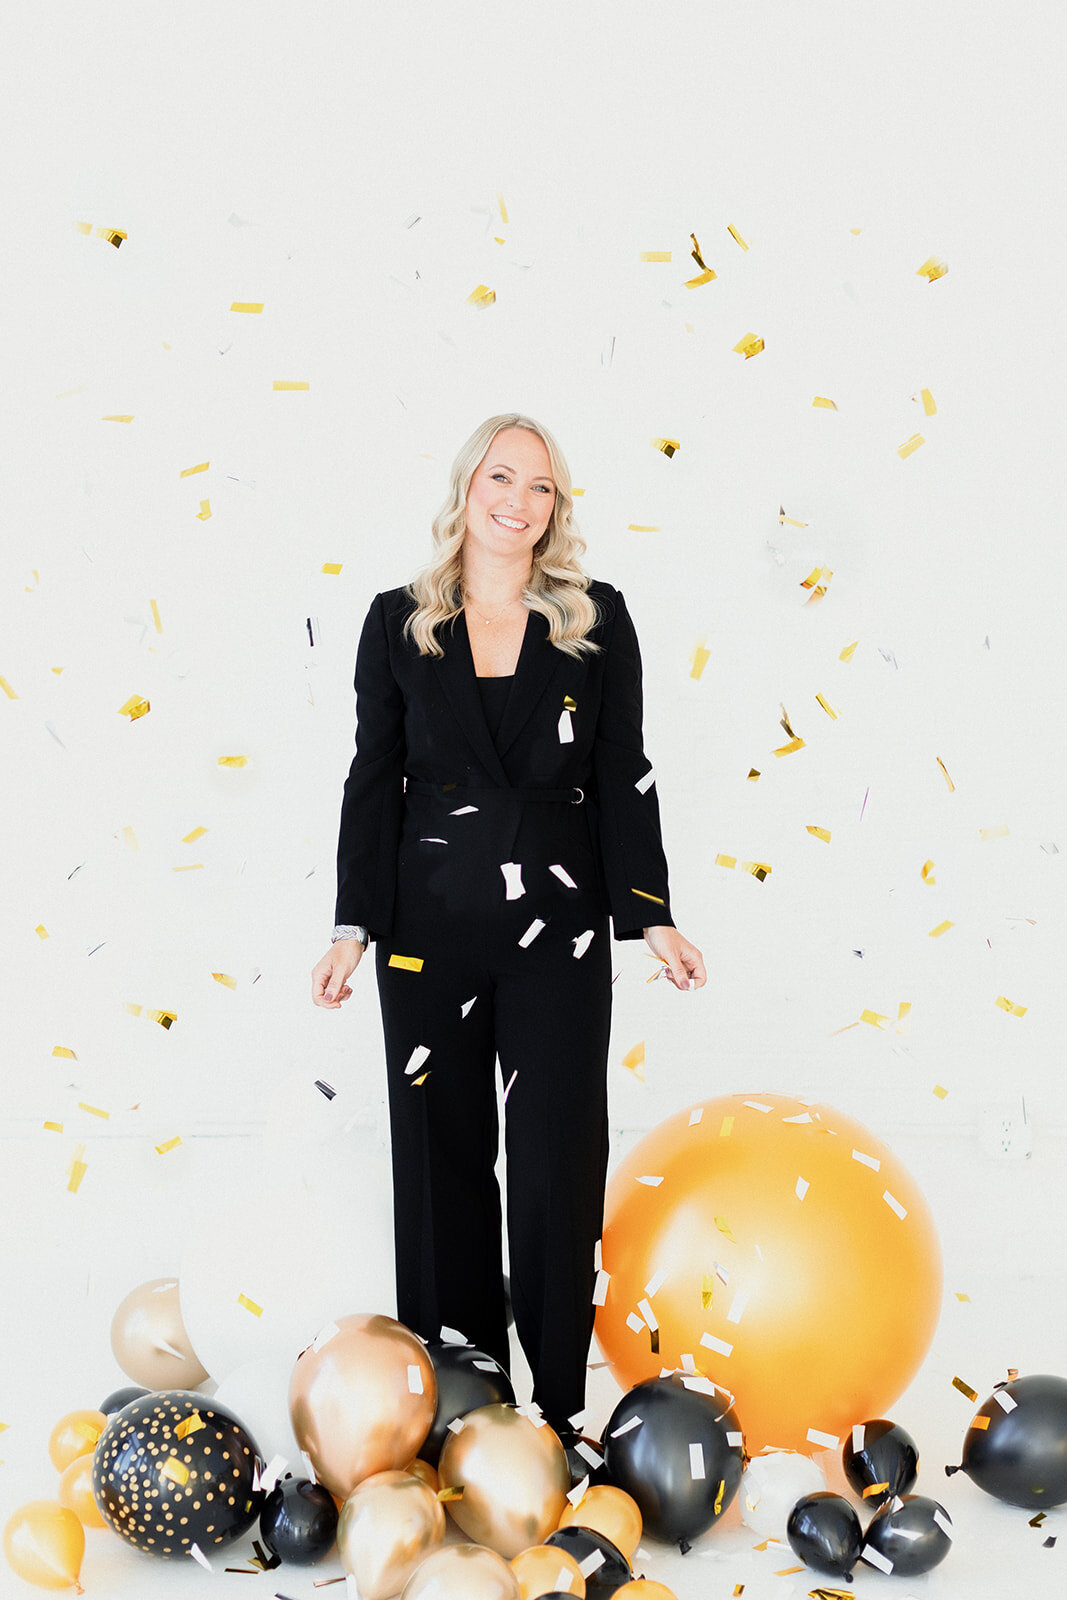 blonde woman stands in front of a white backdrop with black and gold balloons at her feet as gold confetti falls from the sky. She is smiling and wearing a black suit